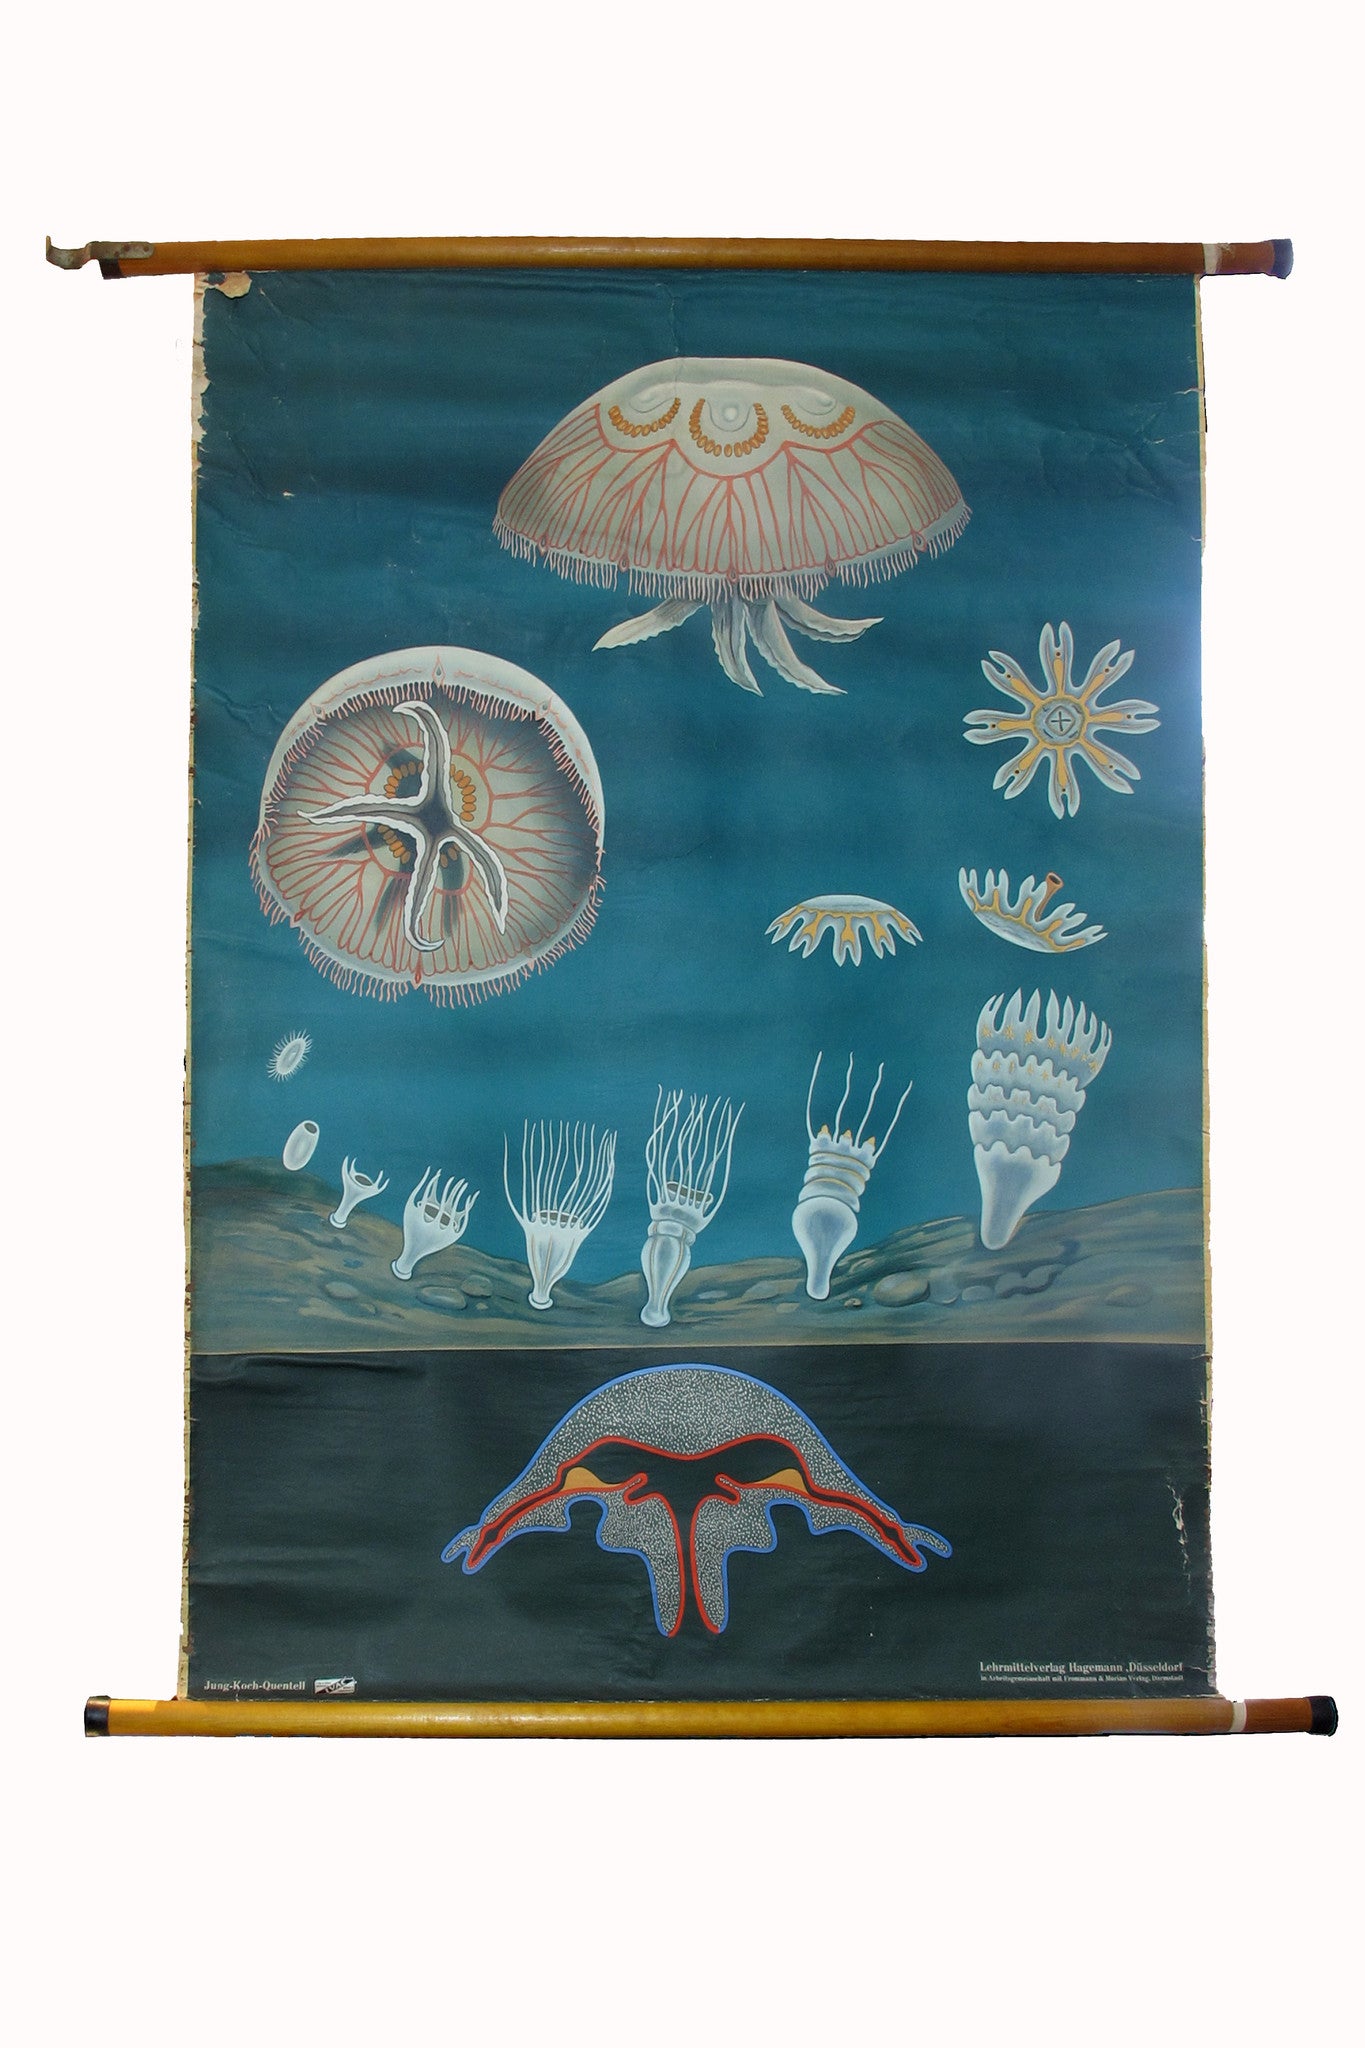 X Large linen backed wall chart of jellyfish , early 20th century.